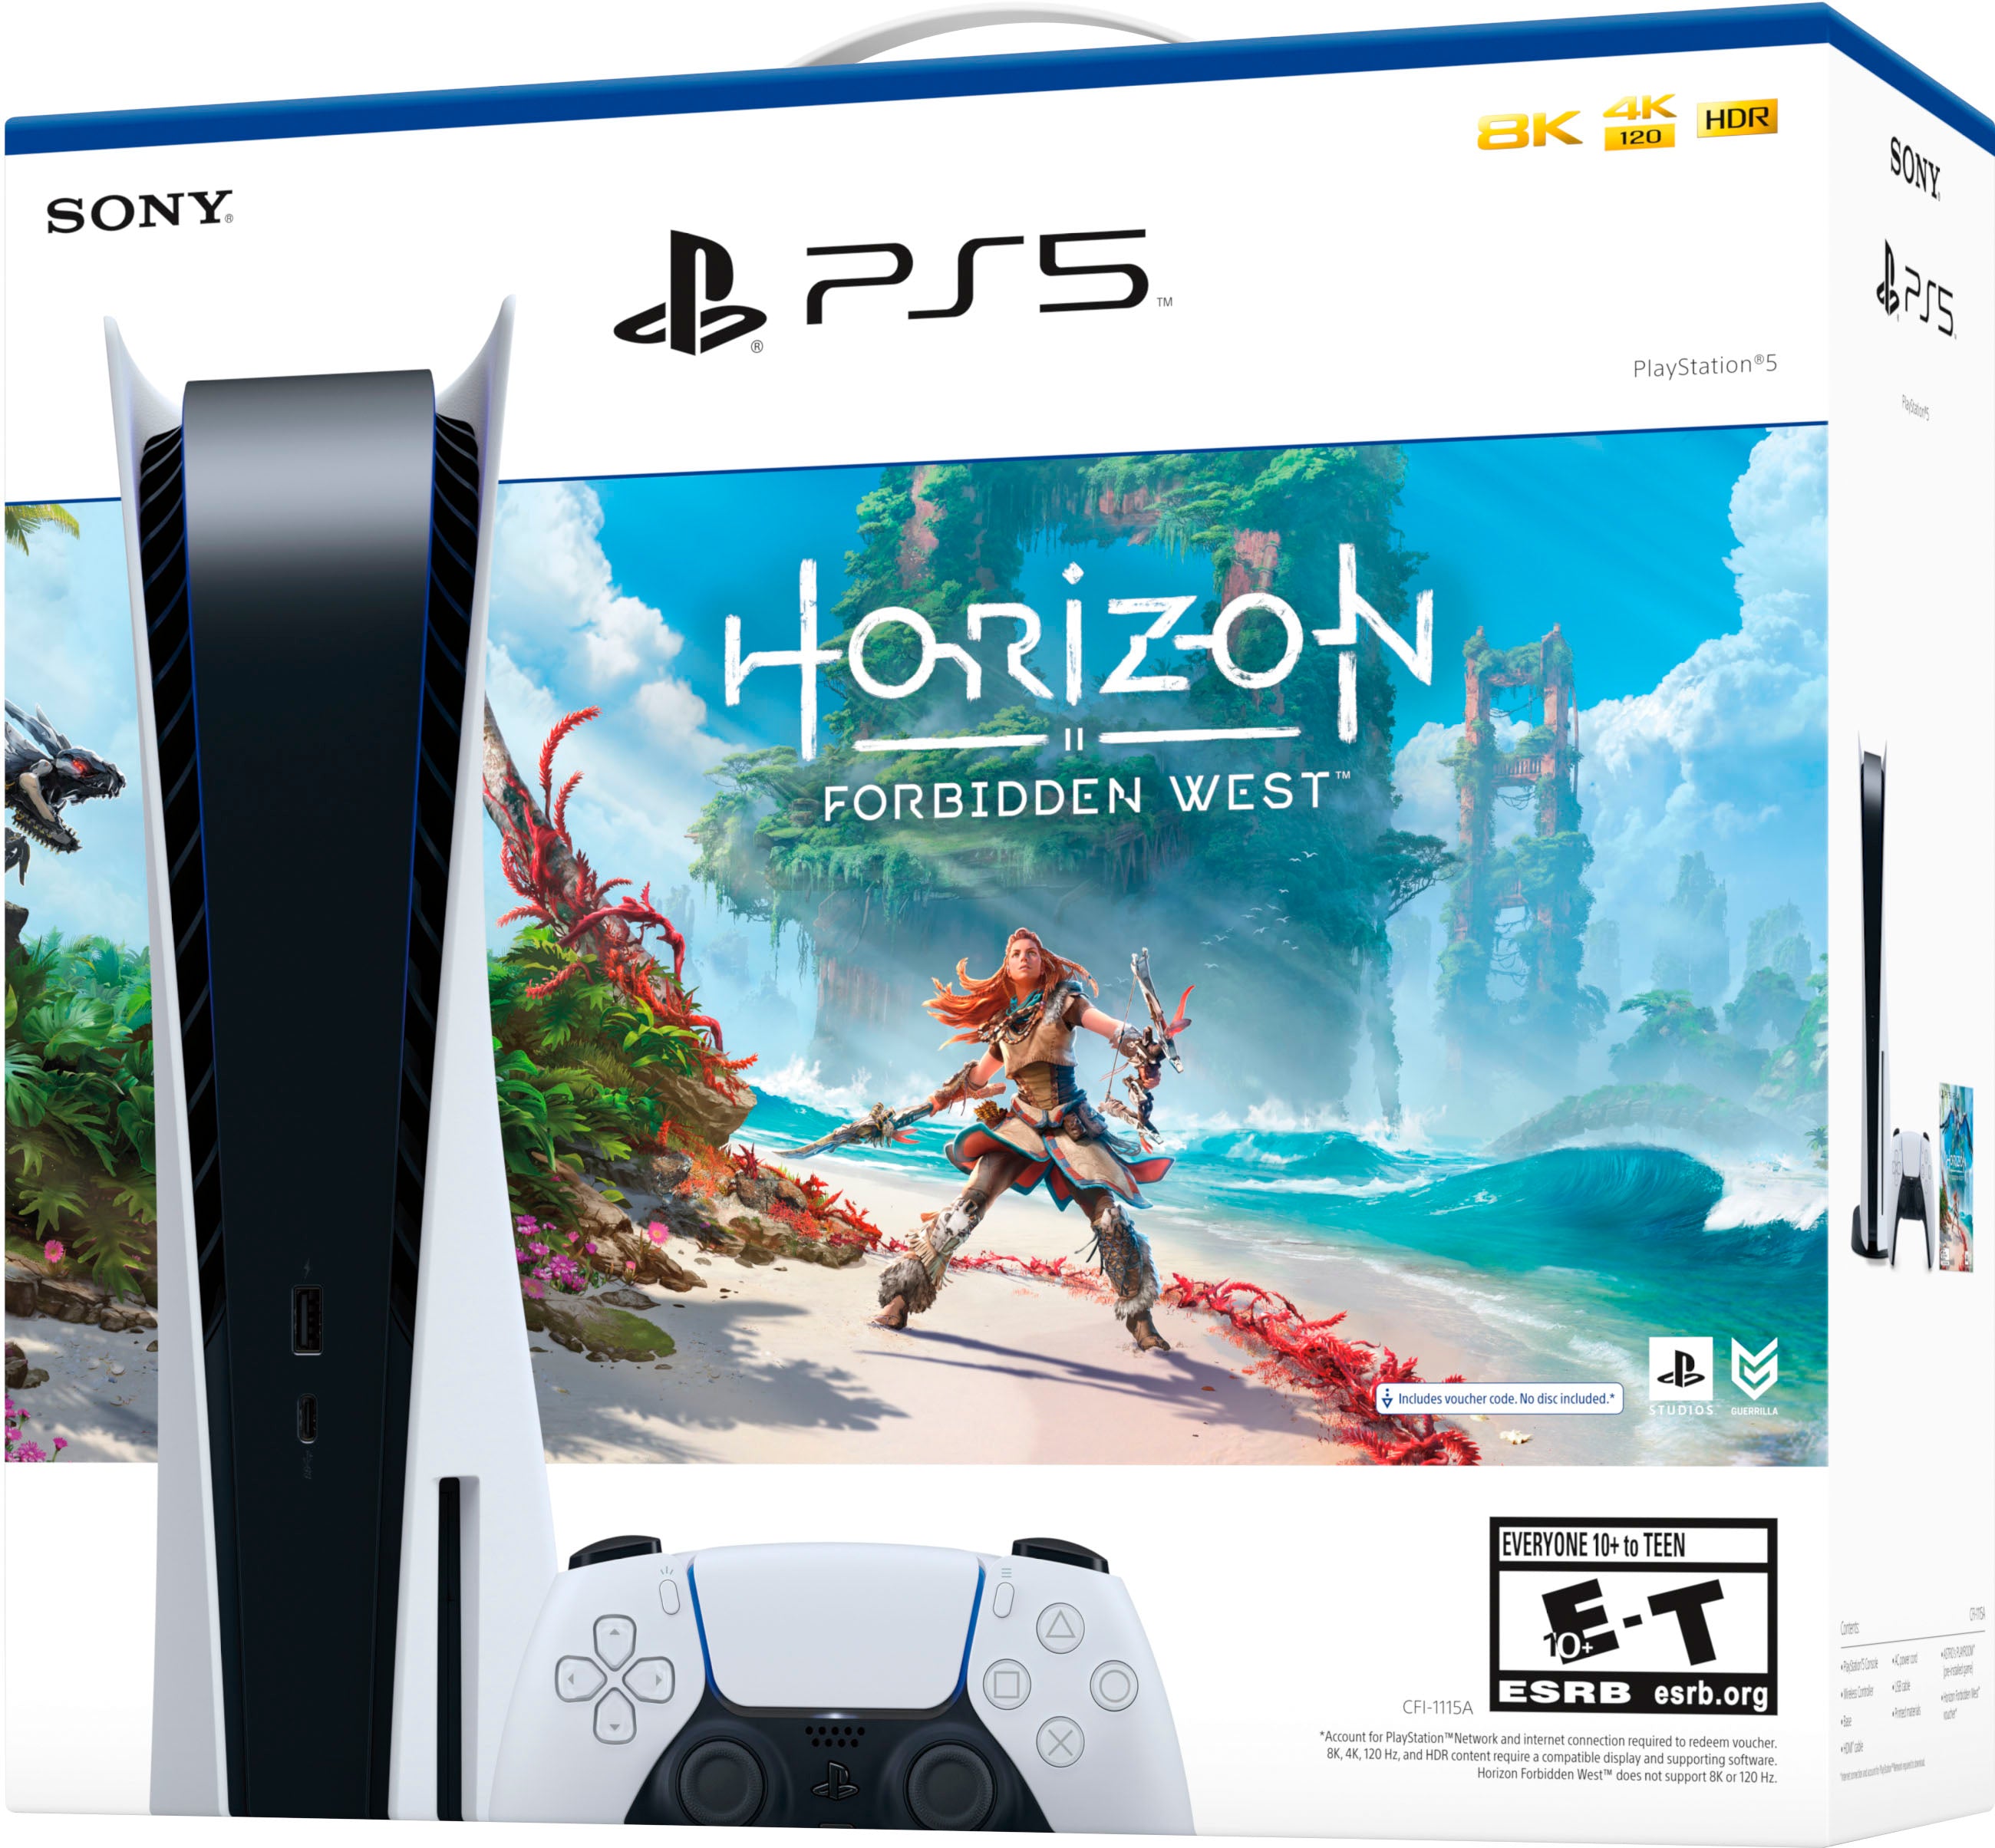 Playstation 5 Horizon Forbidden West Bundle with Security Breach and Mytrix Controller Charger